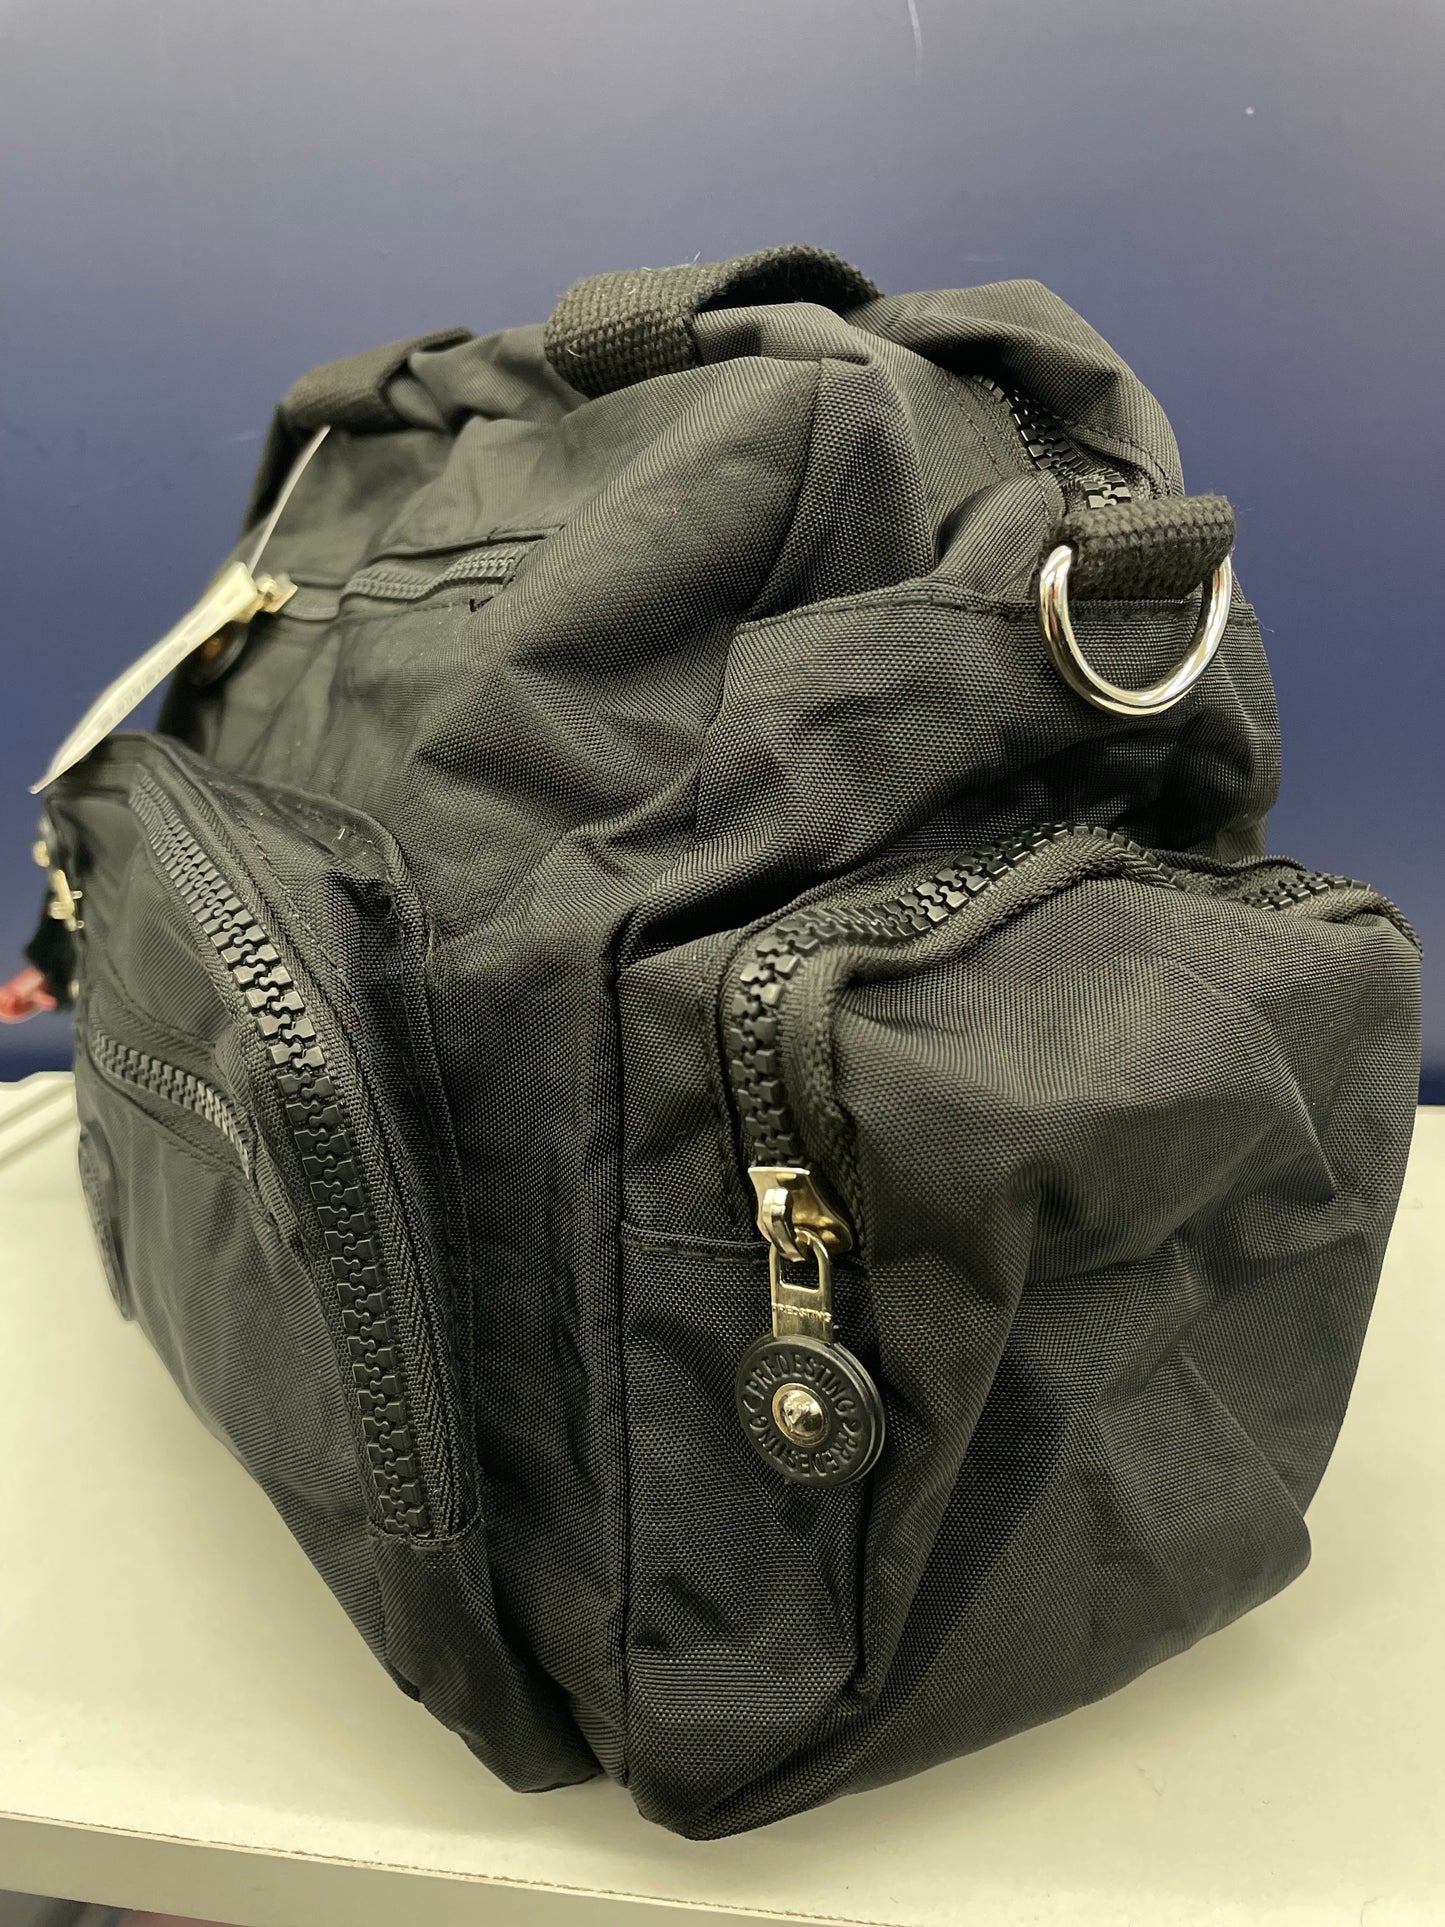 YY2302- Hand bag with Zippers